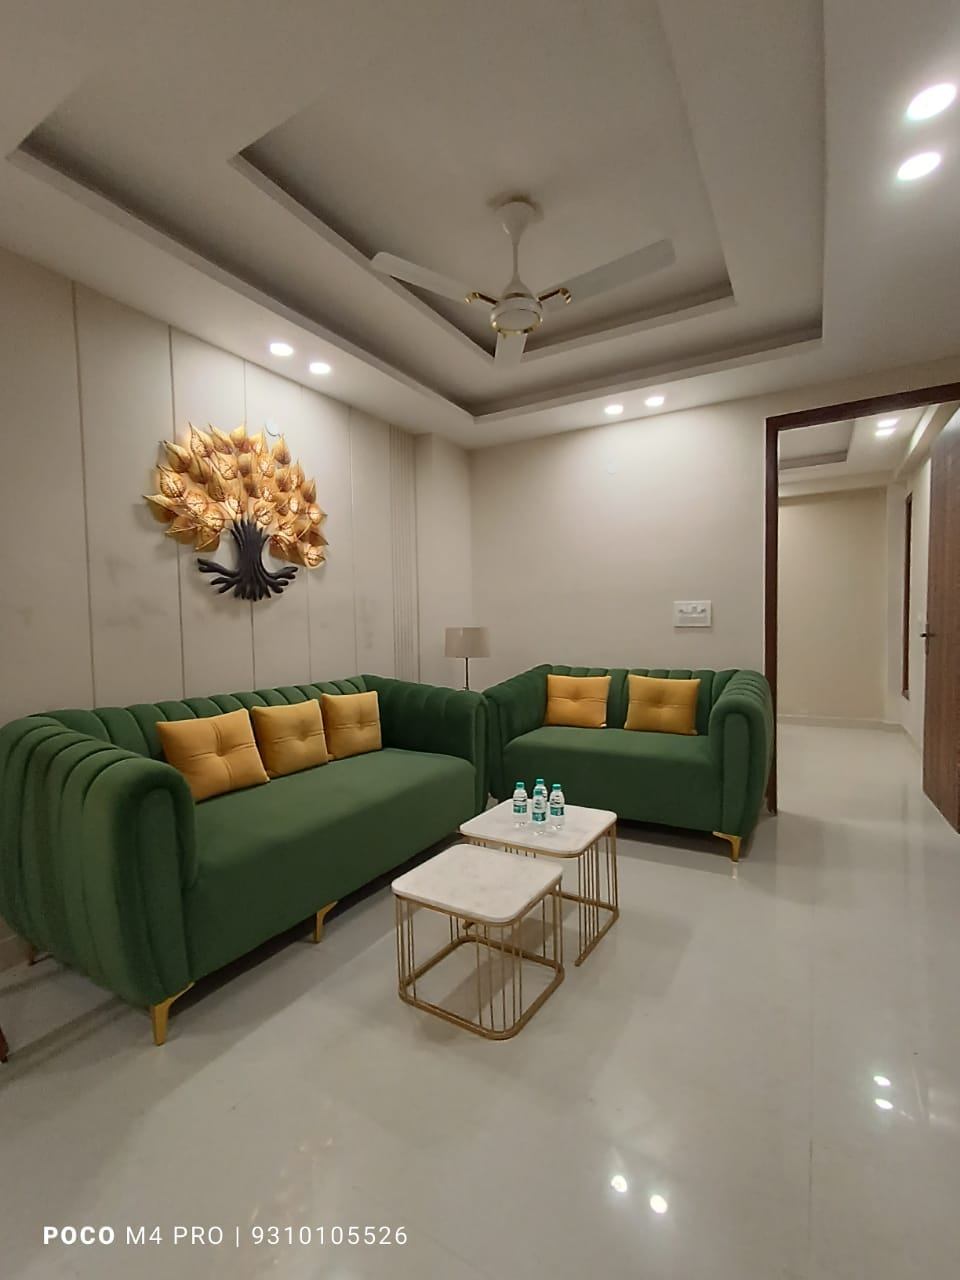 2 Bed/ 2 Bath Sell Apartment/ Flat; 1,100 sq. ft. carpet area; Ready To Move for sale @chhatarpur New Delhi